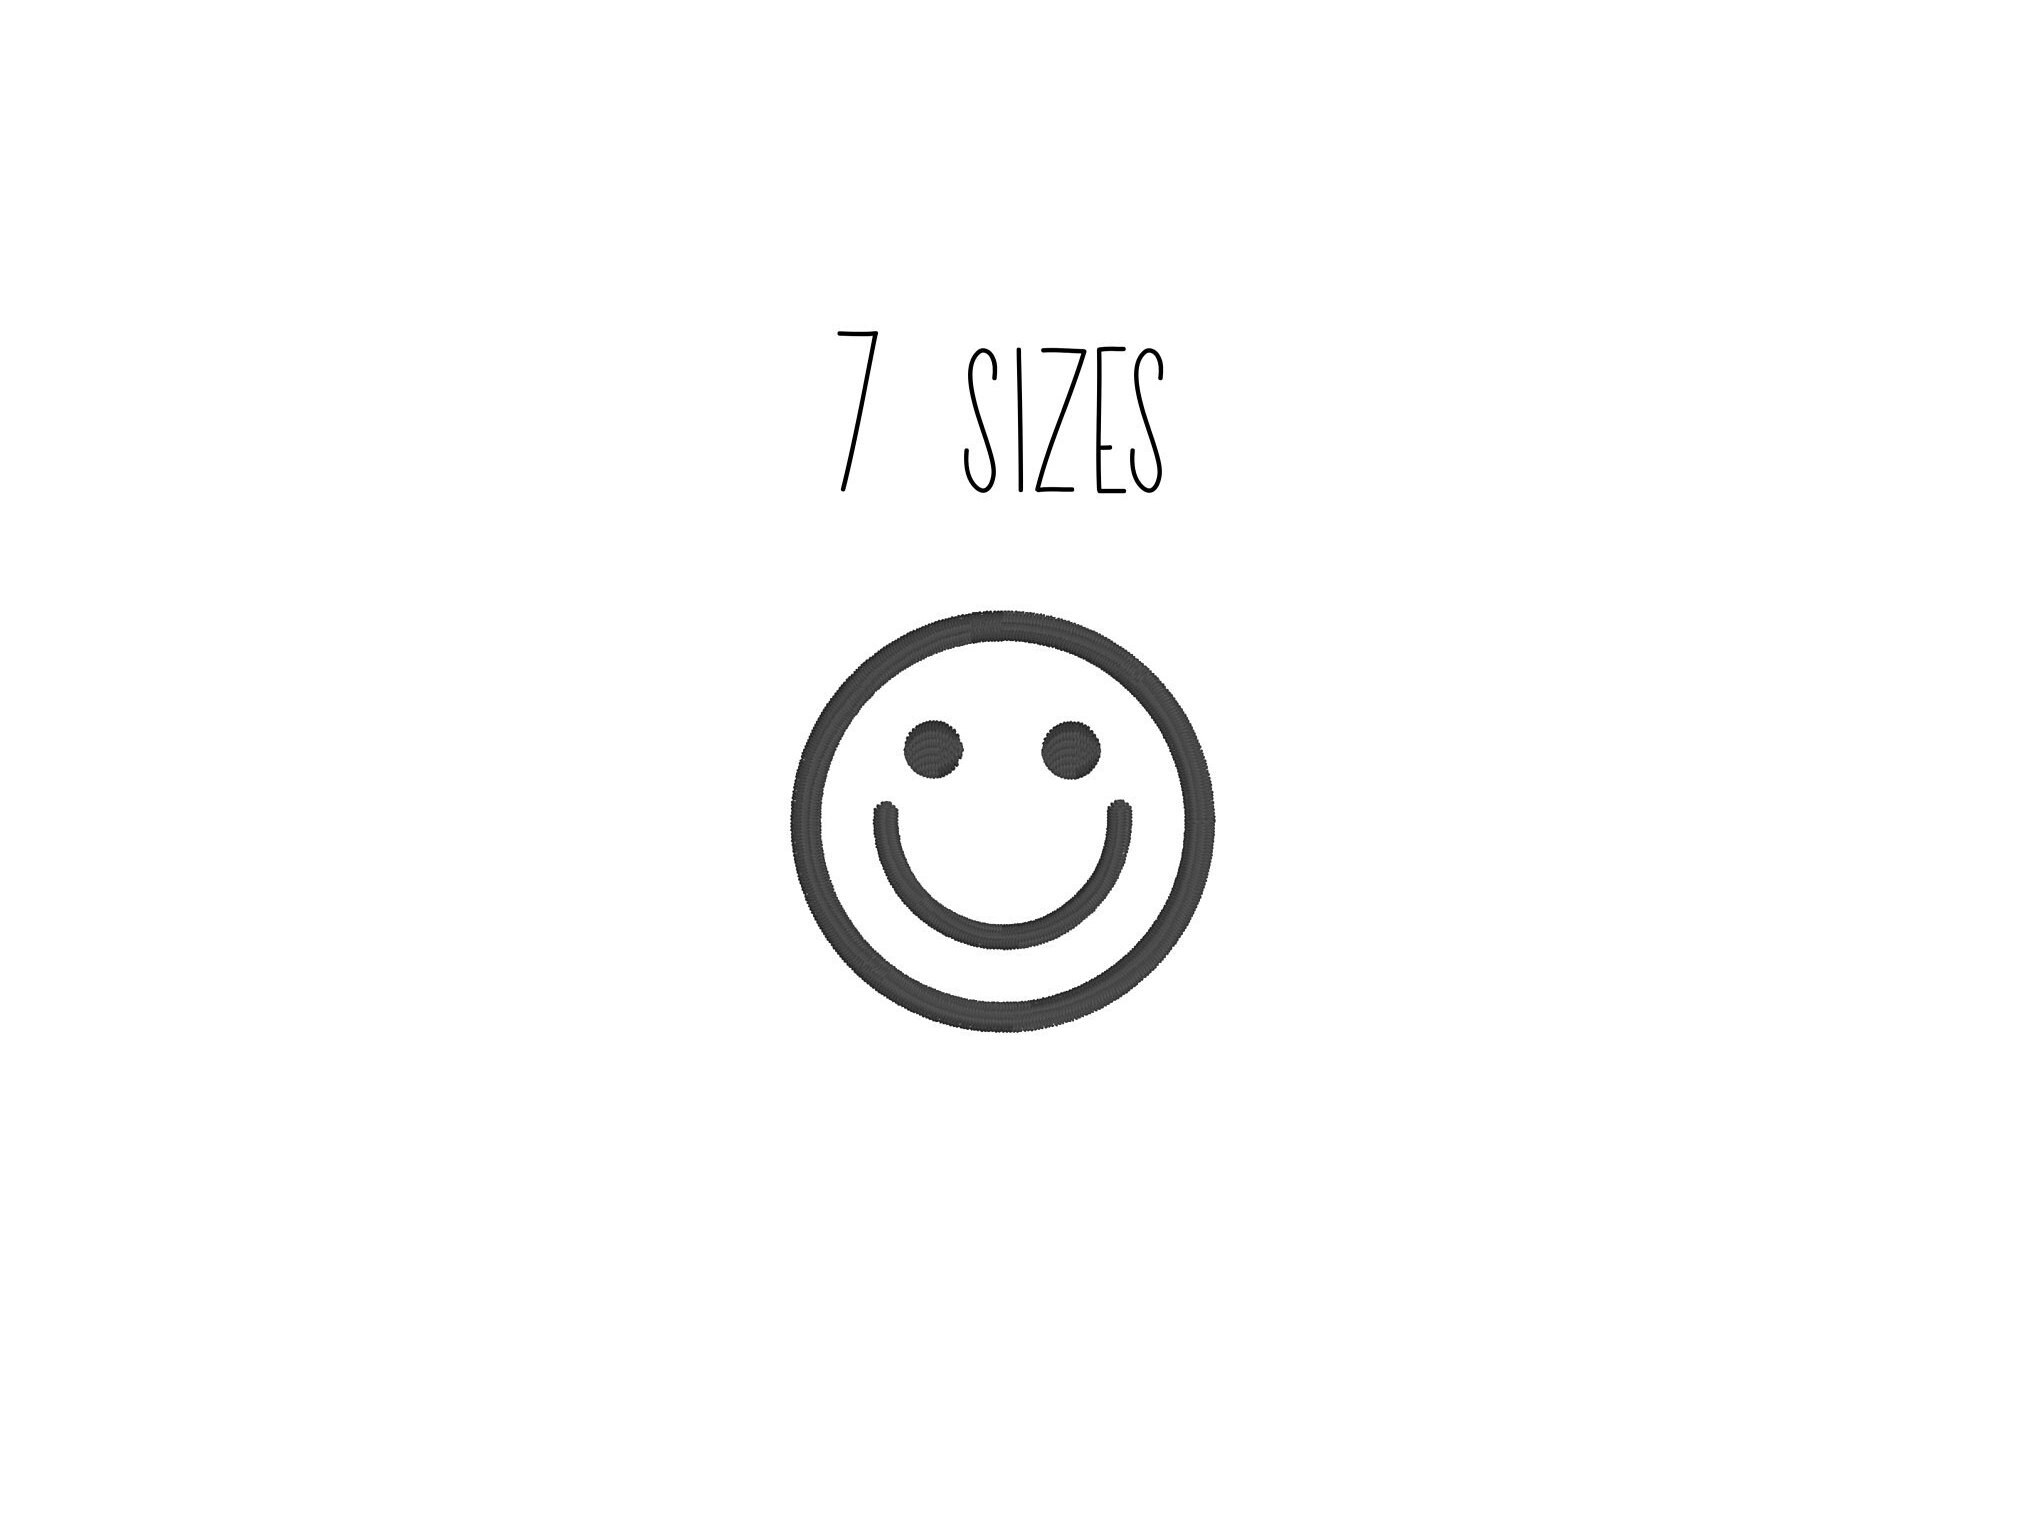 Smiley face embroidery design file 15 size smiley face Design machine embroidery designs mini smiley face